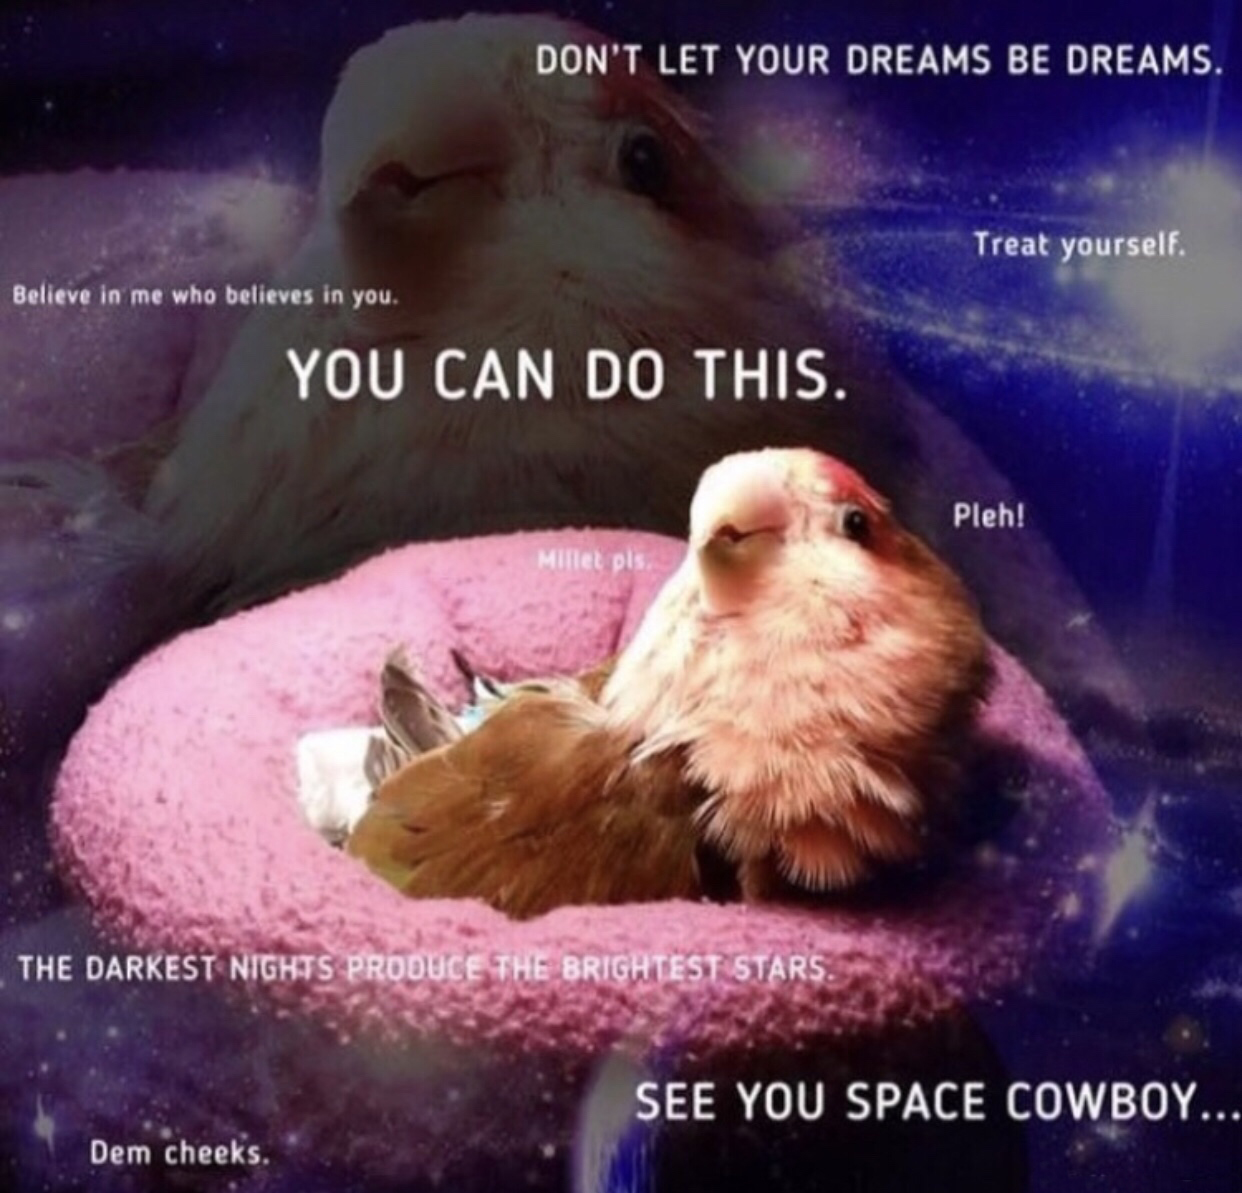 birb support - Don'T Let Your Dreams Be Dreams. Treat yourself. Believe in me who believes in you. You Can Do This. Pleh! Millet pls The Darkest Nights Produce The Brightest Stars. See You Space Cowboy... Dem cheeks.